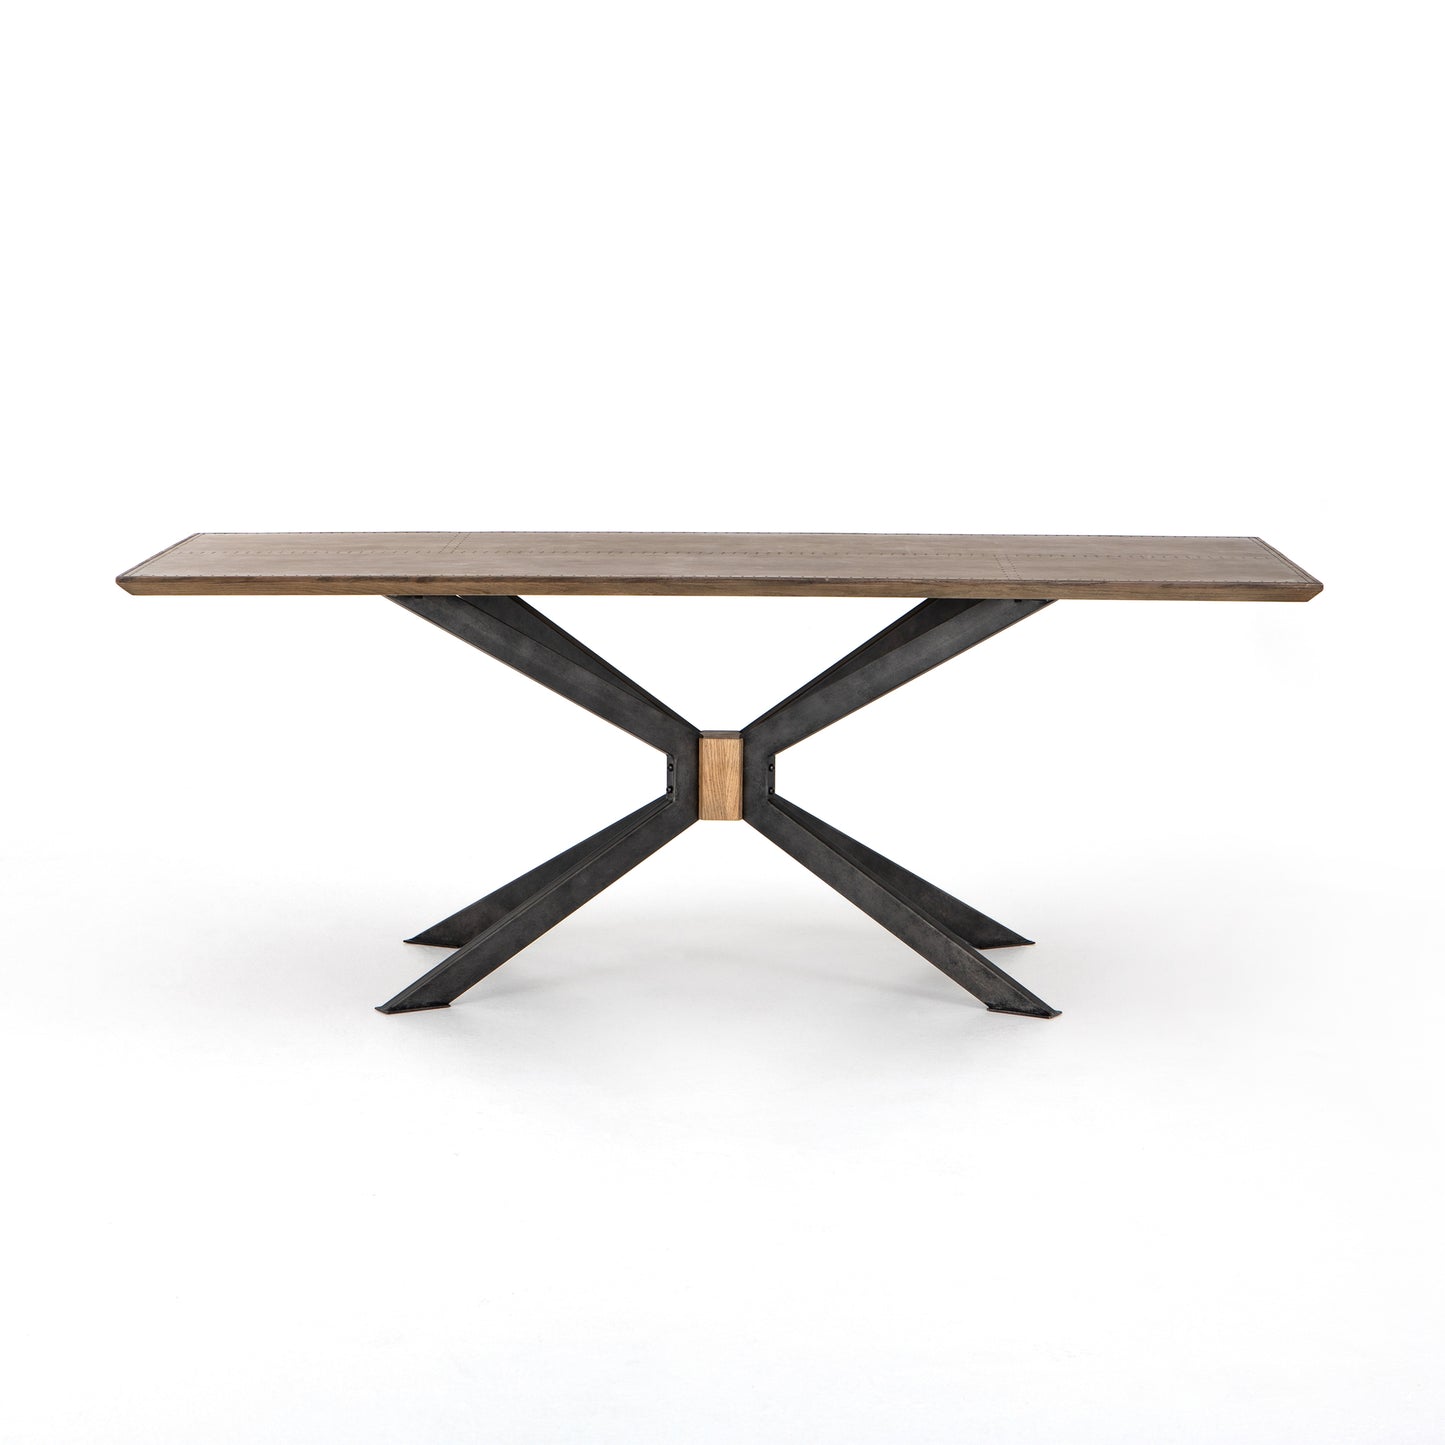 Criss Cross Dining Table Front View